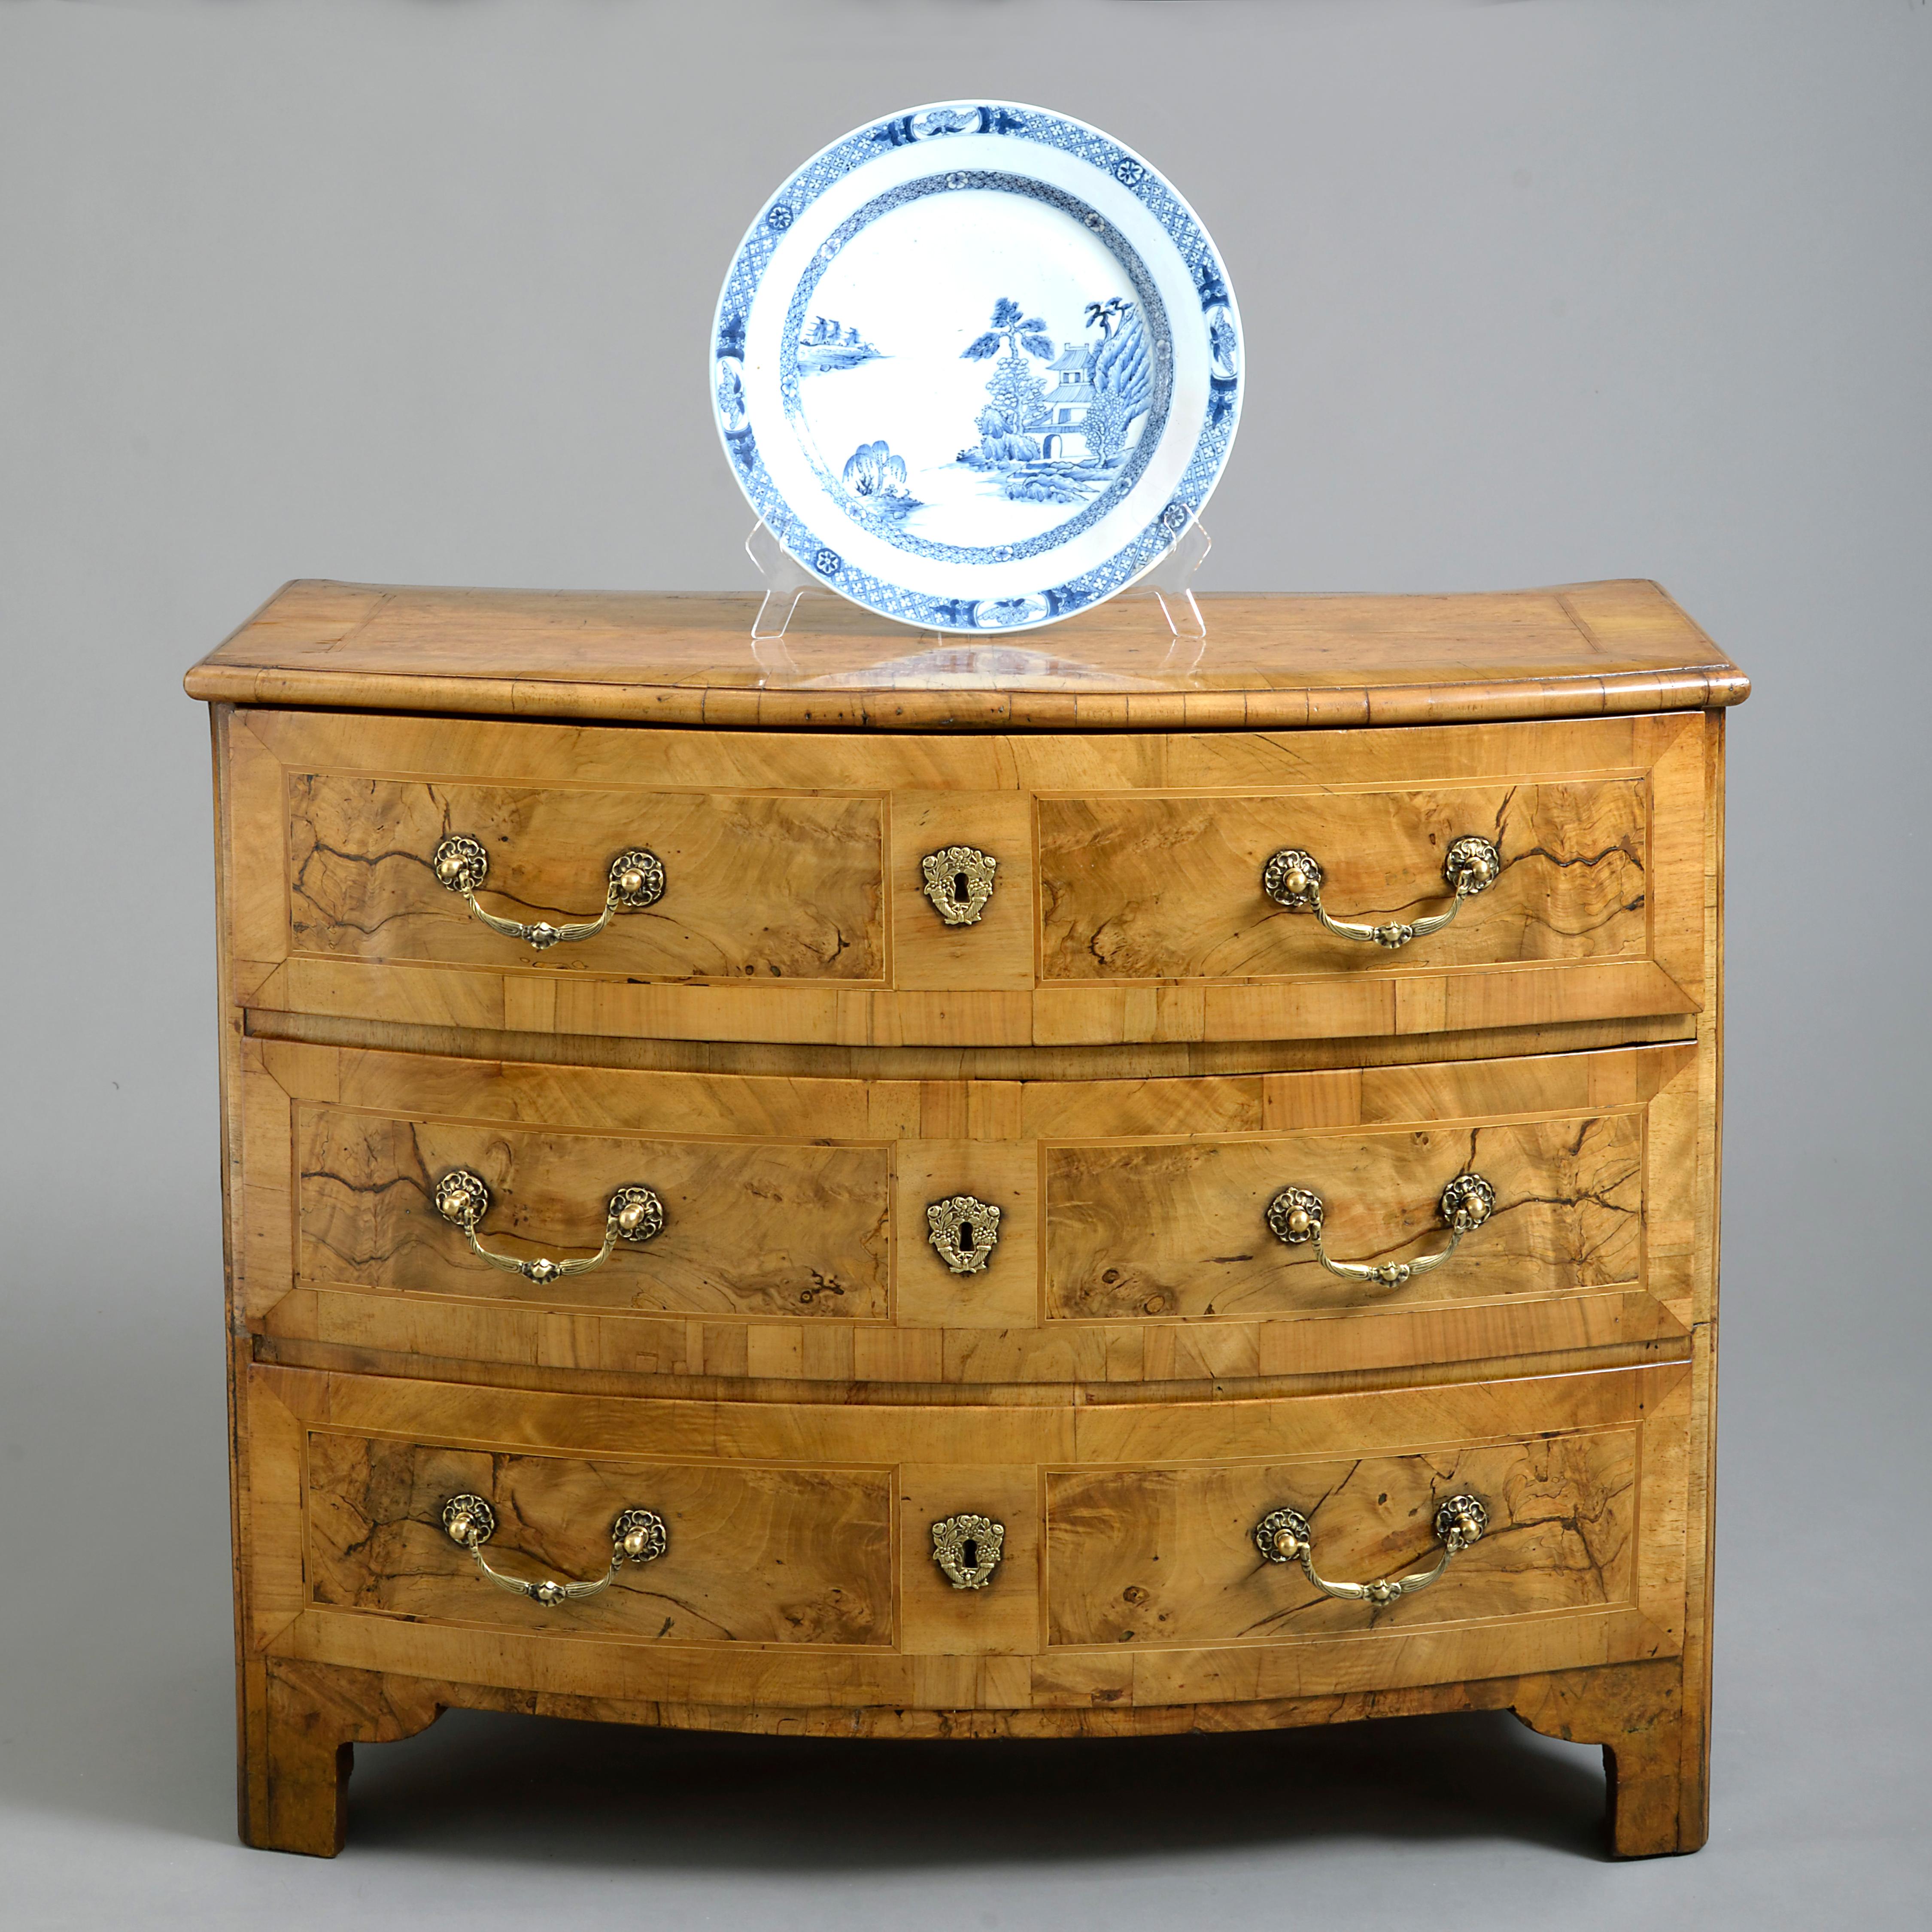 A late 18th century Louis XVI period finely figured burr walnut bow fronted commode, having three long drawers with finely chased brass handles and escutcheons, crossbanding throughout and raised on bracket feet.